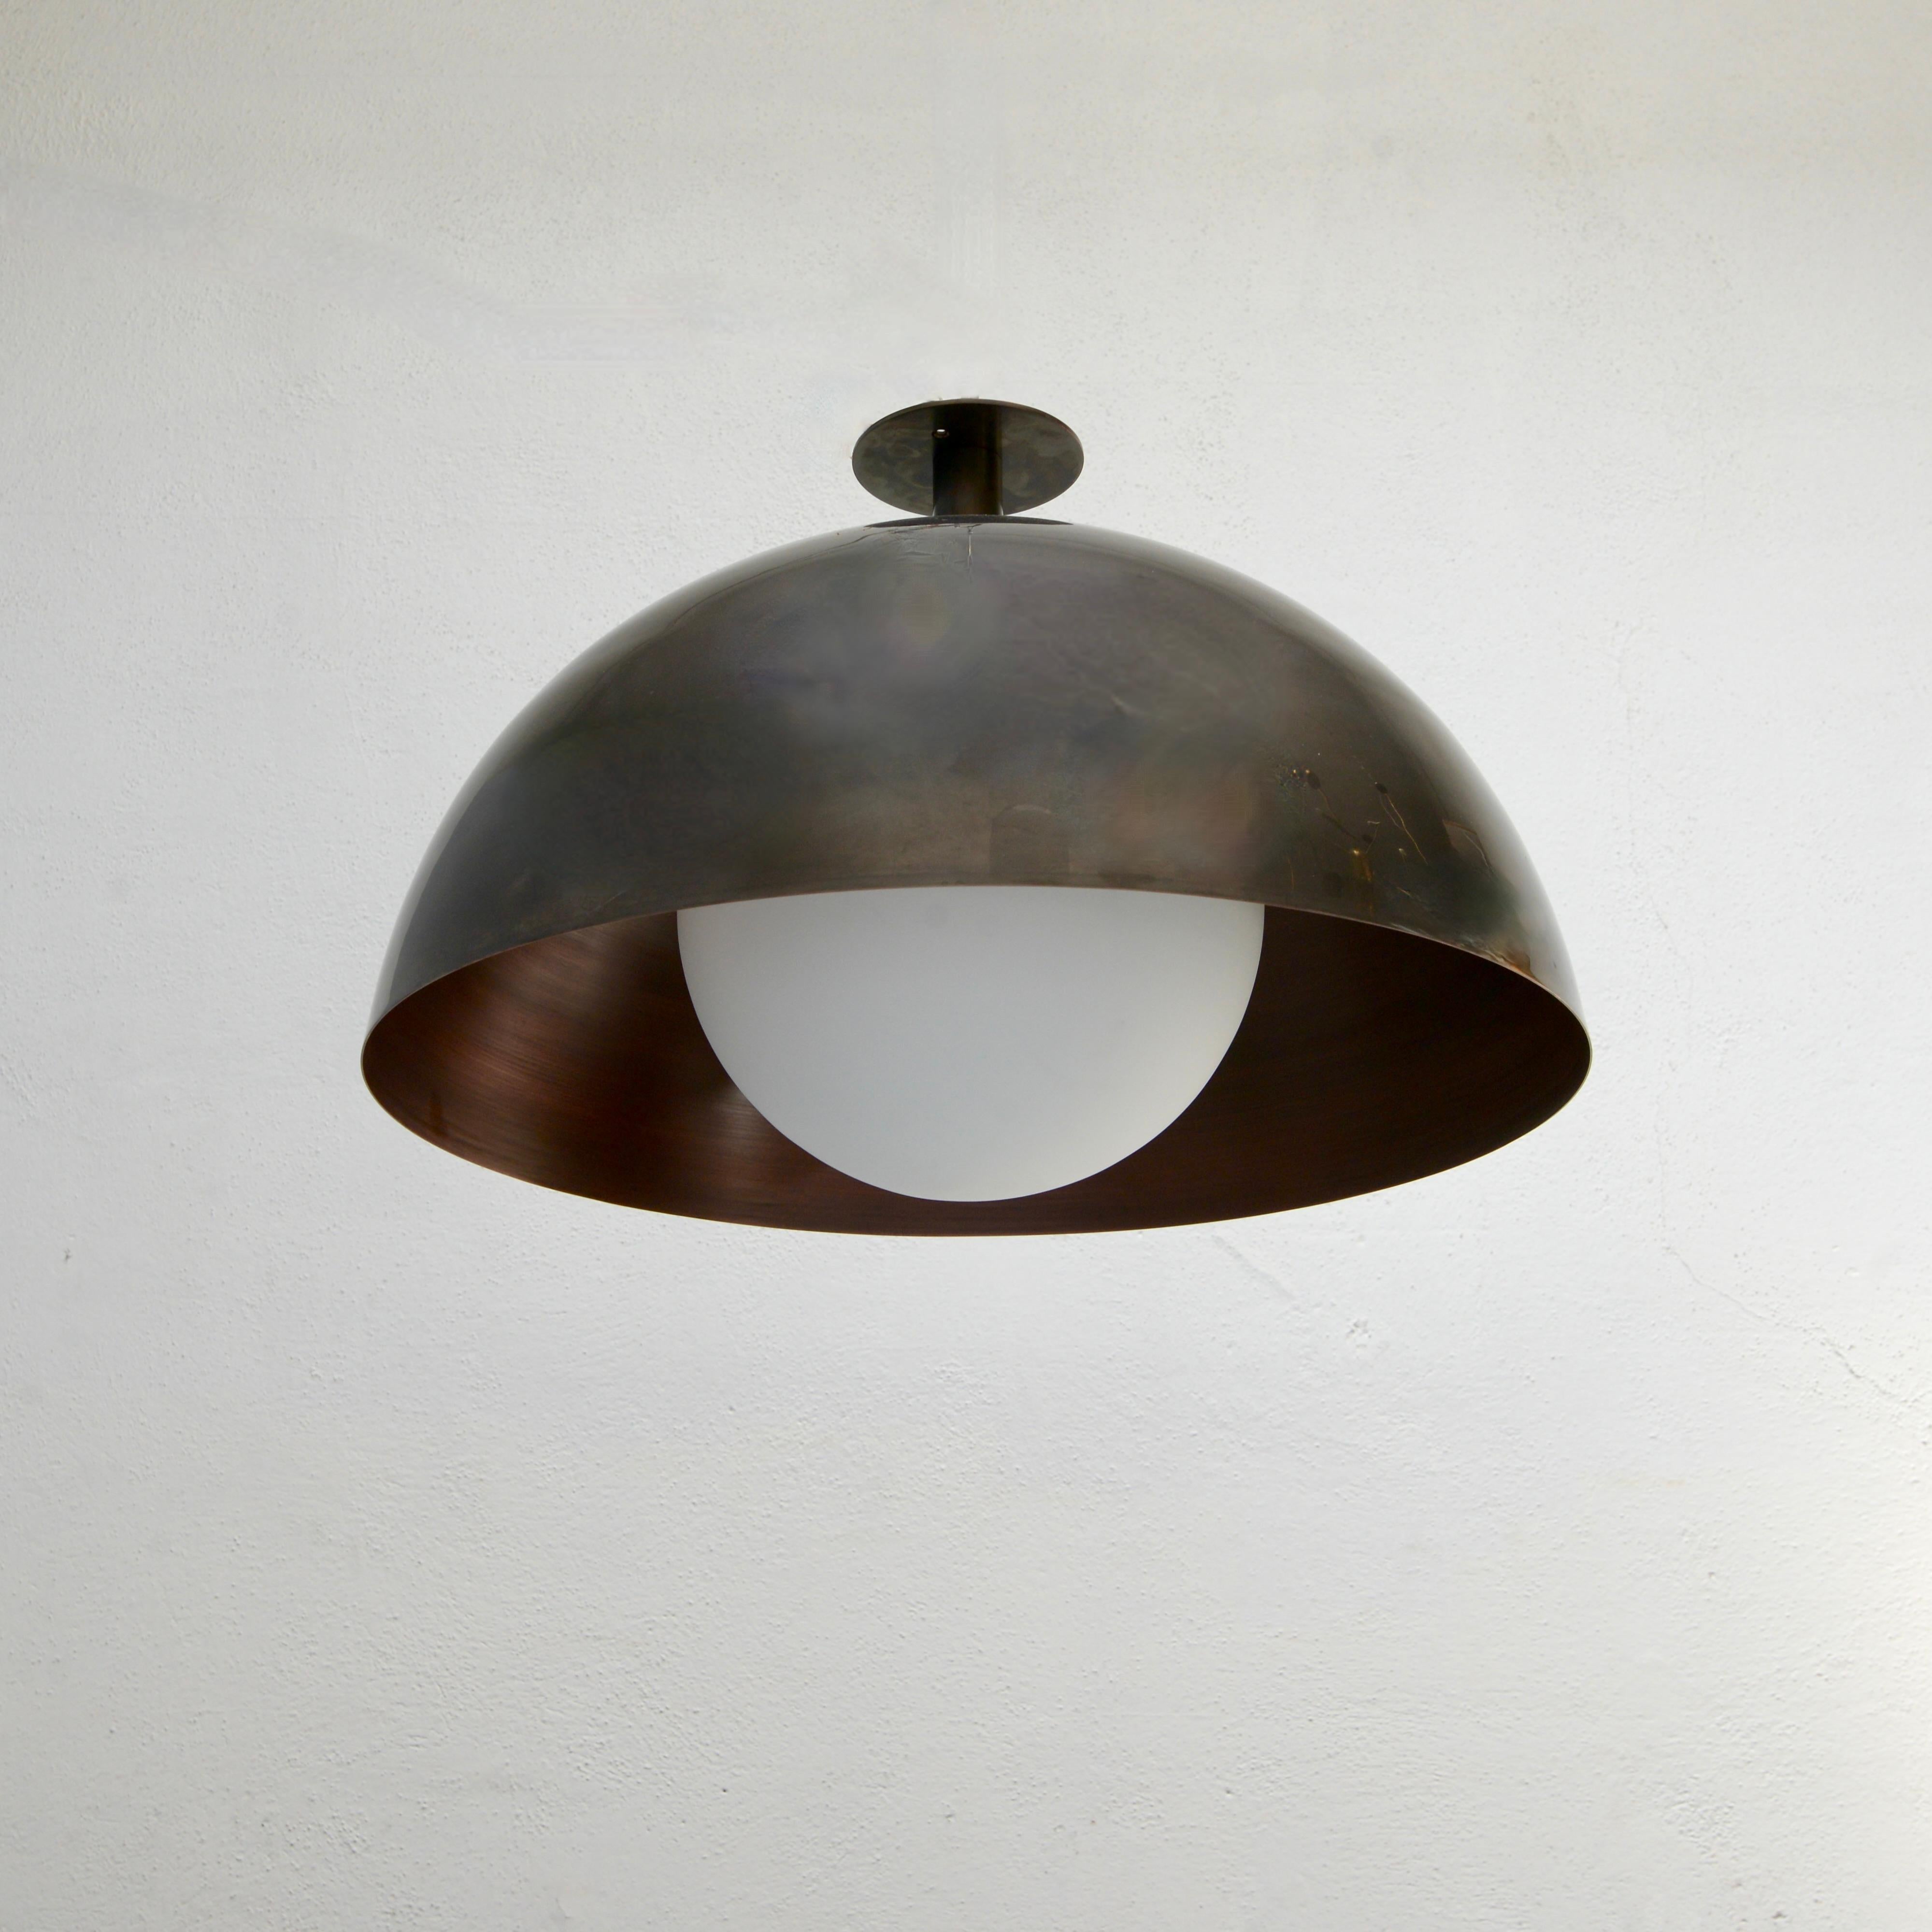 Part of our Lumfardo Luminaires Contemporary Collection, the Large LUdome Copper Flush Mount is a larger version of our all copper and glass modern bowl flush mount light fixture (LUdome Copper Flush Mount). Made to order. The flush mount comes with